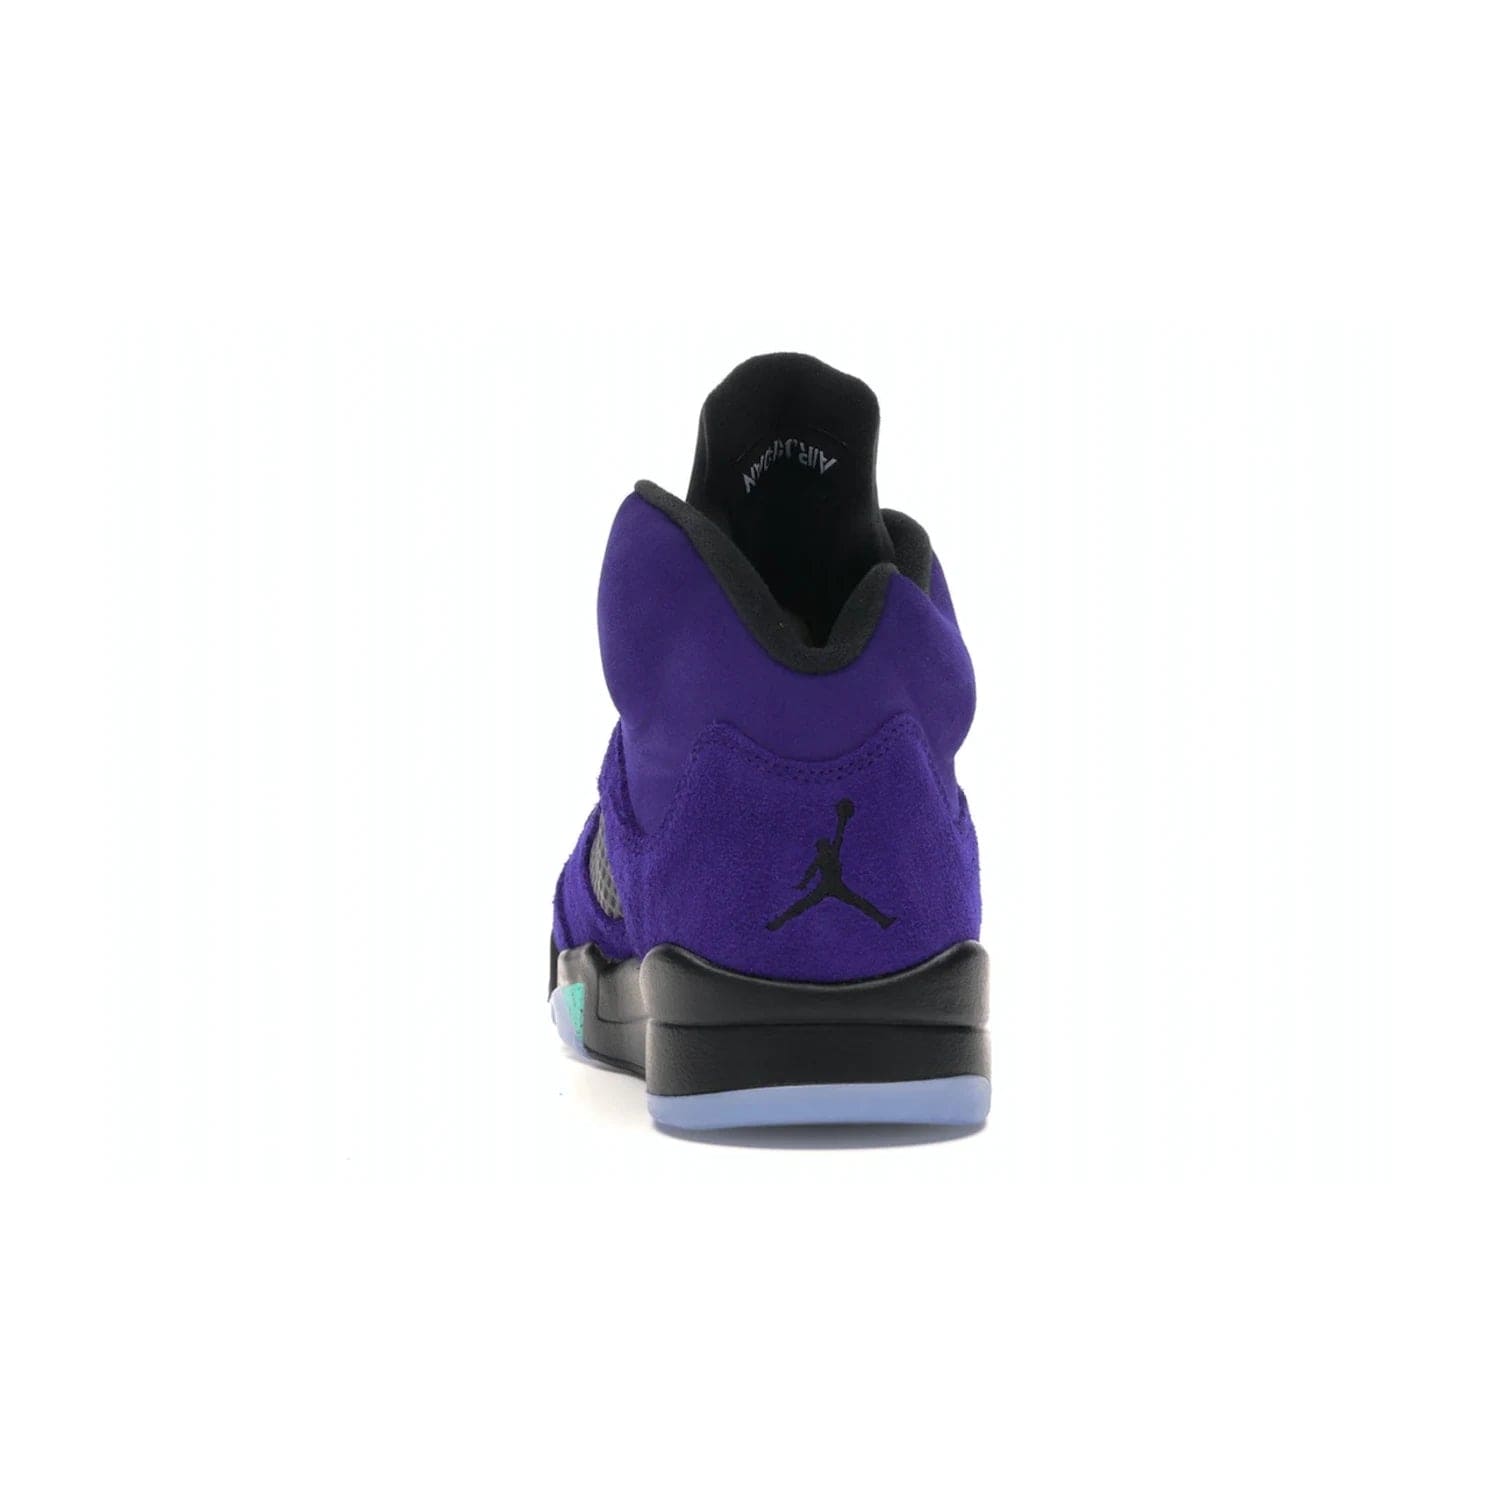 Jordan 5 Retro Alternate Grape - Image 27 - Only at www.BallersClubKickz.com - Bring the classic Jordan 5 Retro Alternate Grape to your sneaker collection! Featuring a purple suede upper, charcoal underlays, green detailing, and an icy and green outsole. Releasing for the first time since 1990, don't miss this chance to add a piece of sneaker history to your collection.